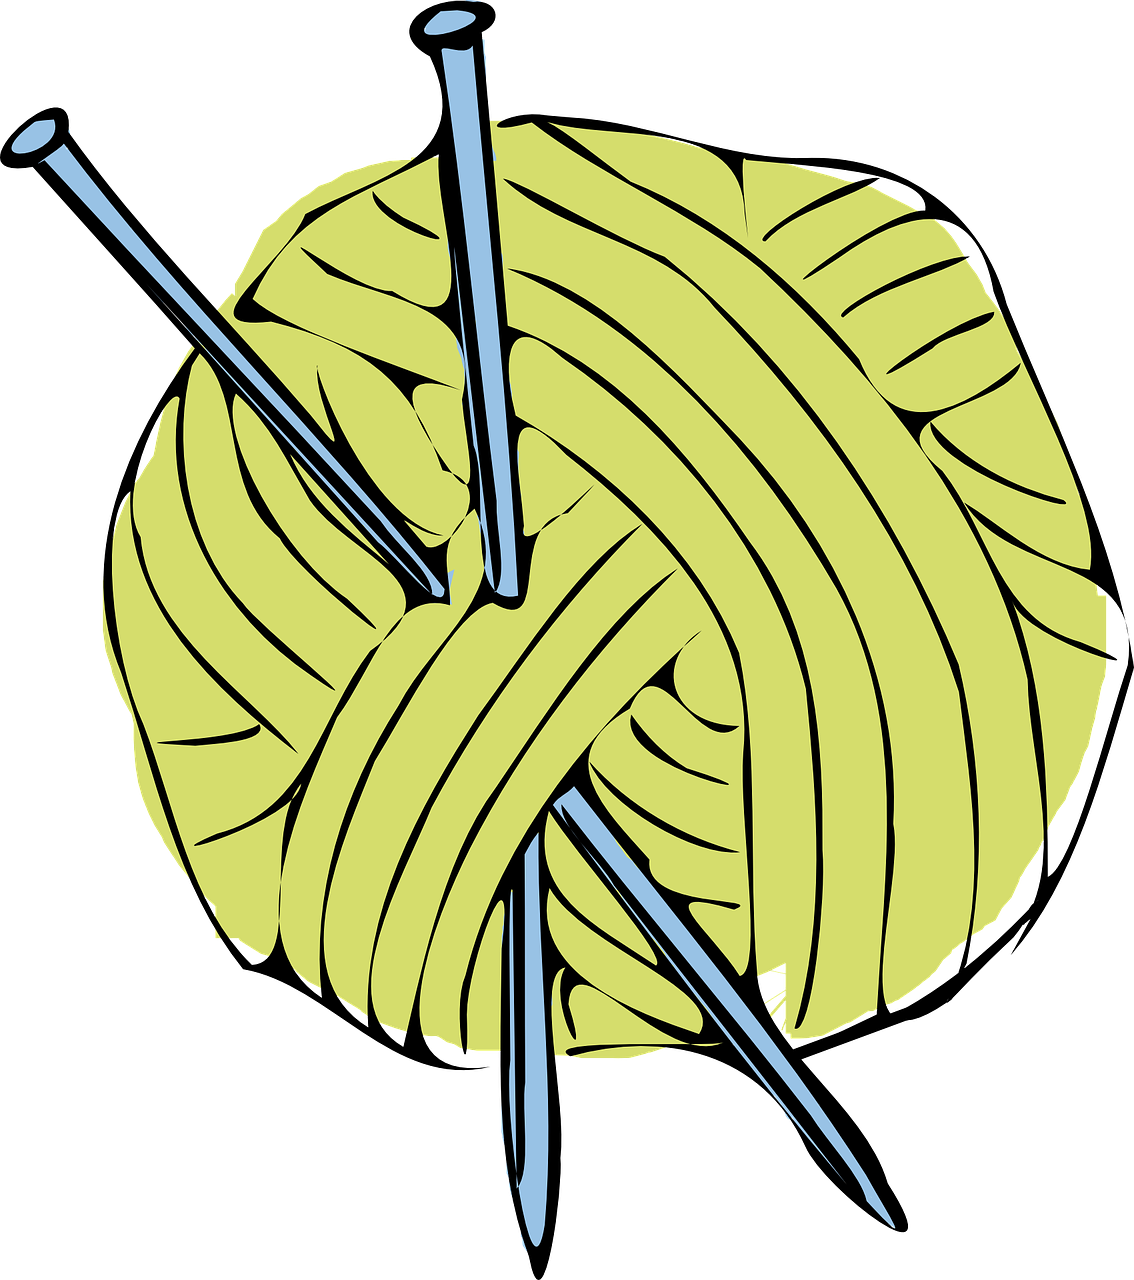 A Ball Of Yarn With Needles